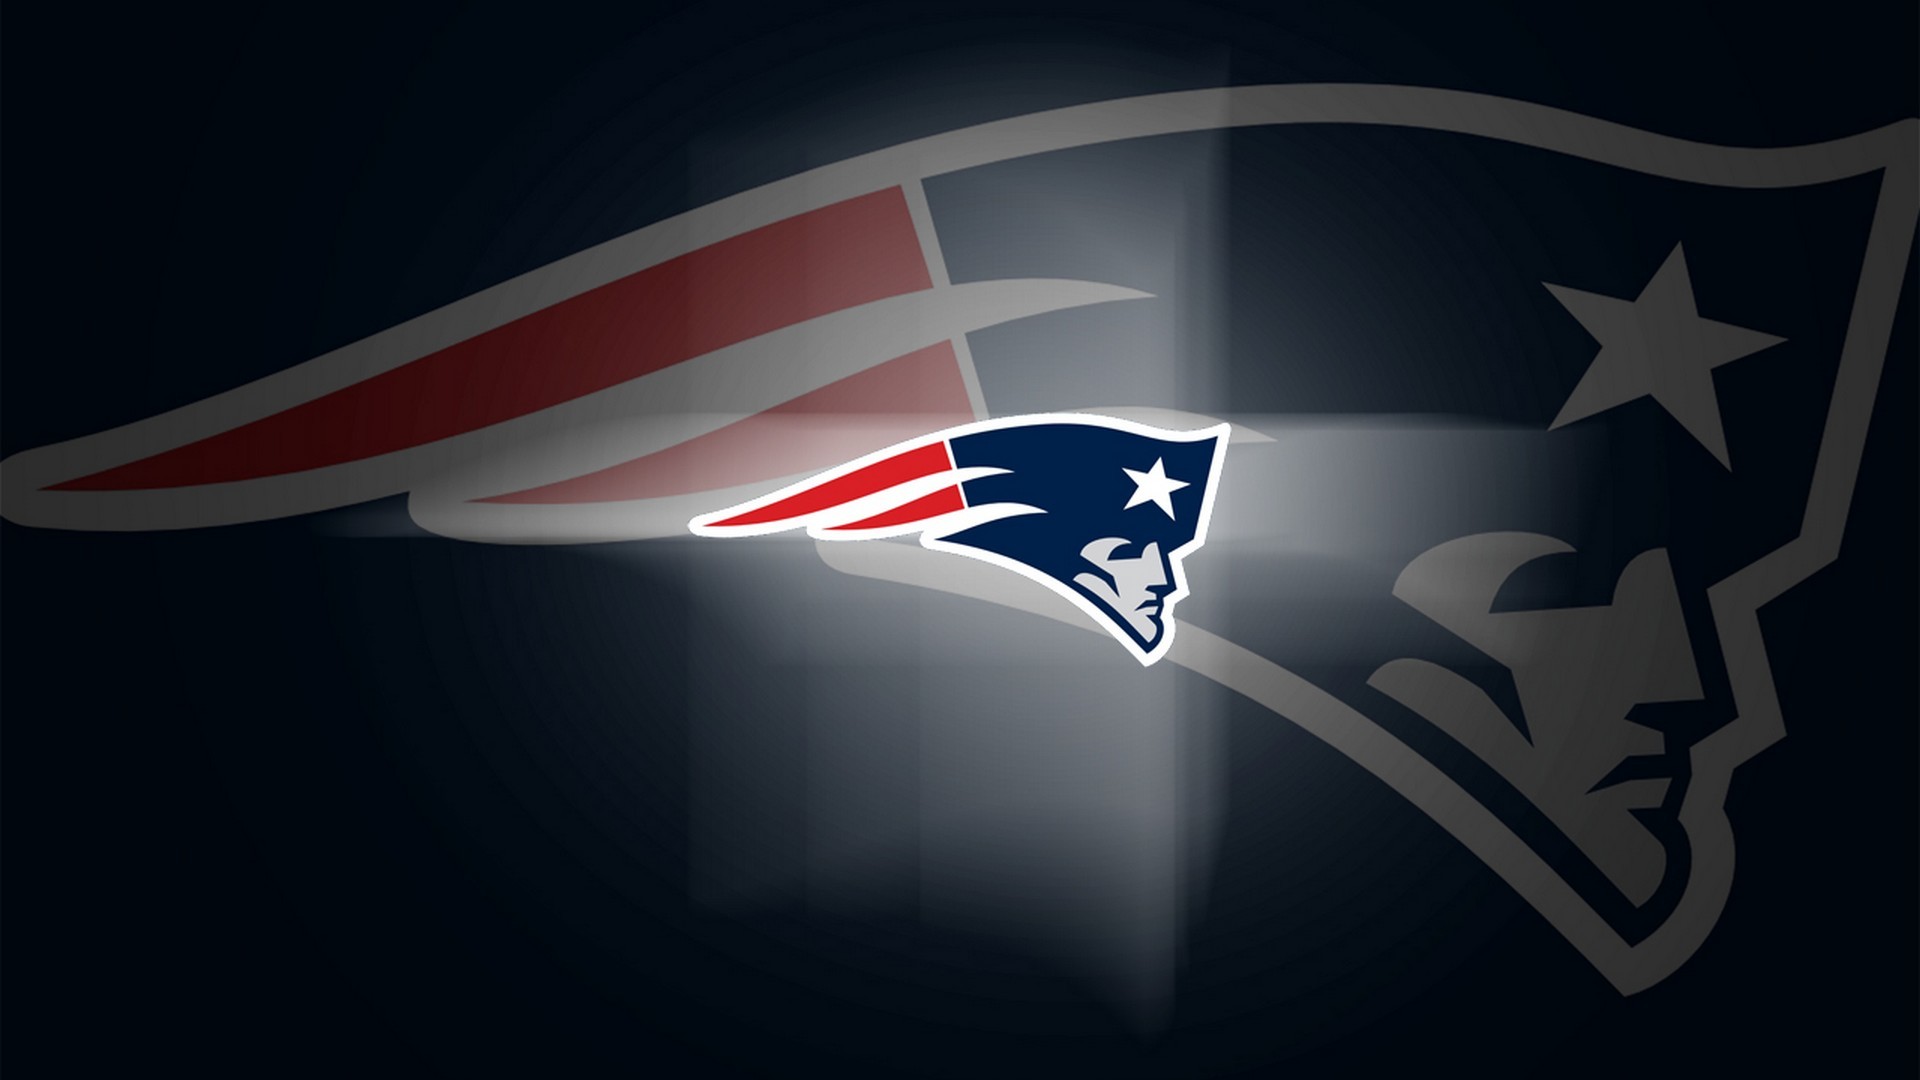 1920x1080 Wallpapers New England Patriots with resolution  pixel. You can  make this wallpaper for your